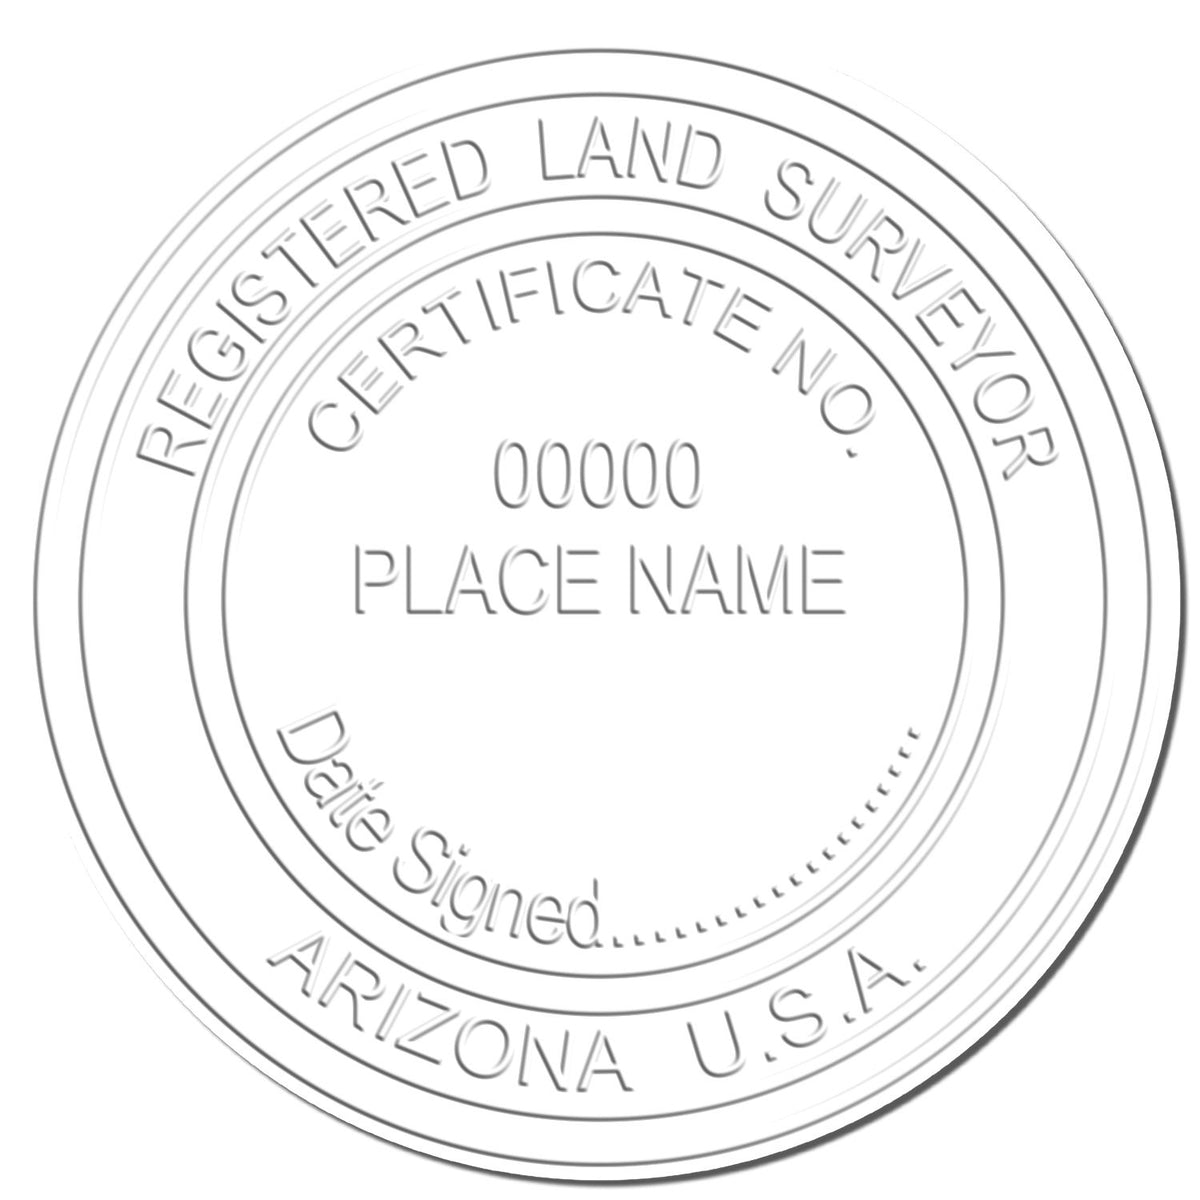 This paper is stamped with a sample imprint of the Handheld Arizona Land Surveyor Seal, signifying its quality and reliability.